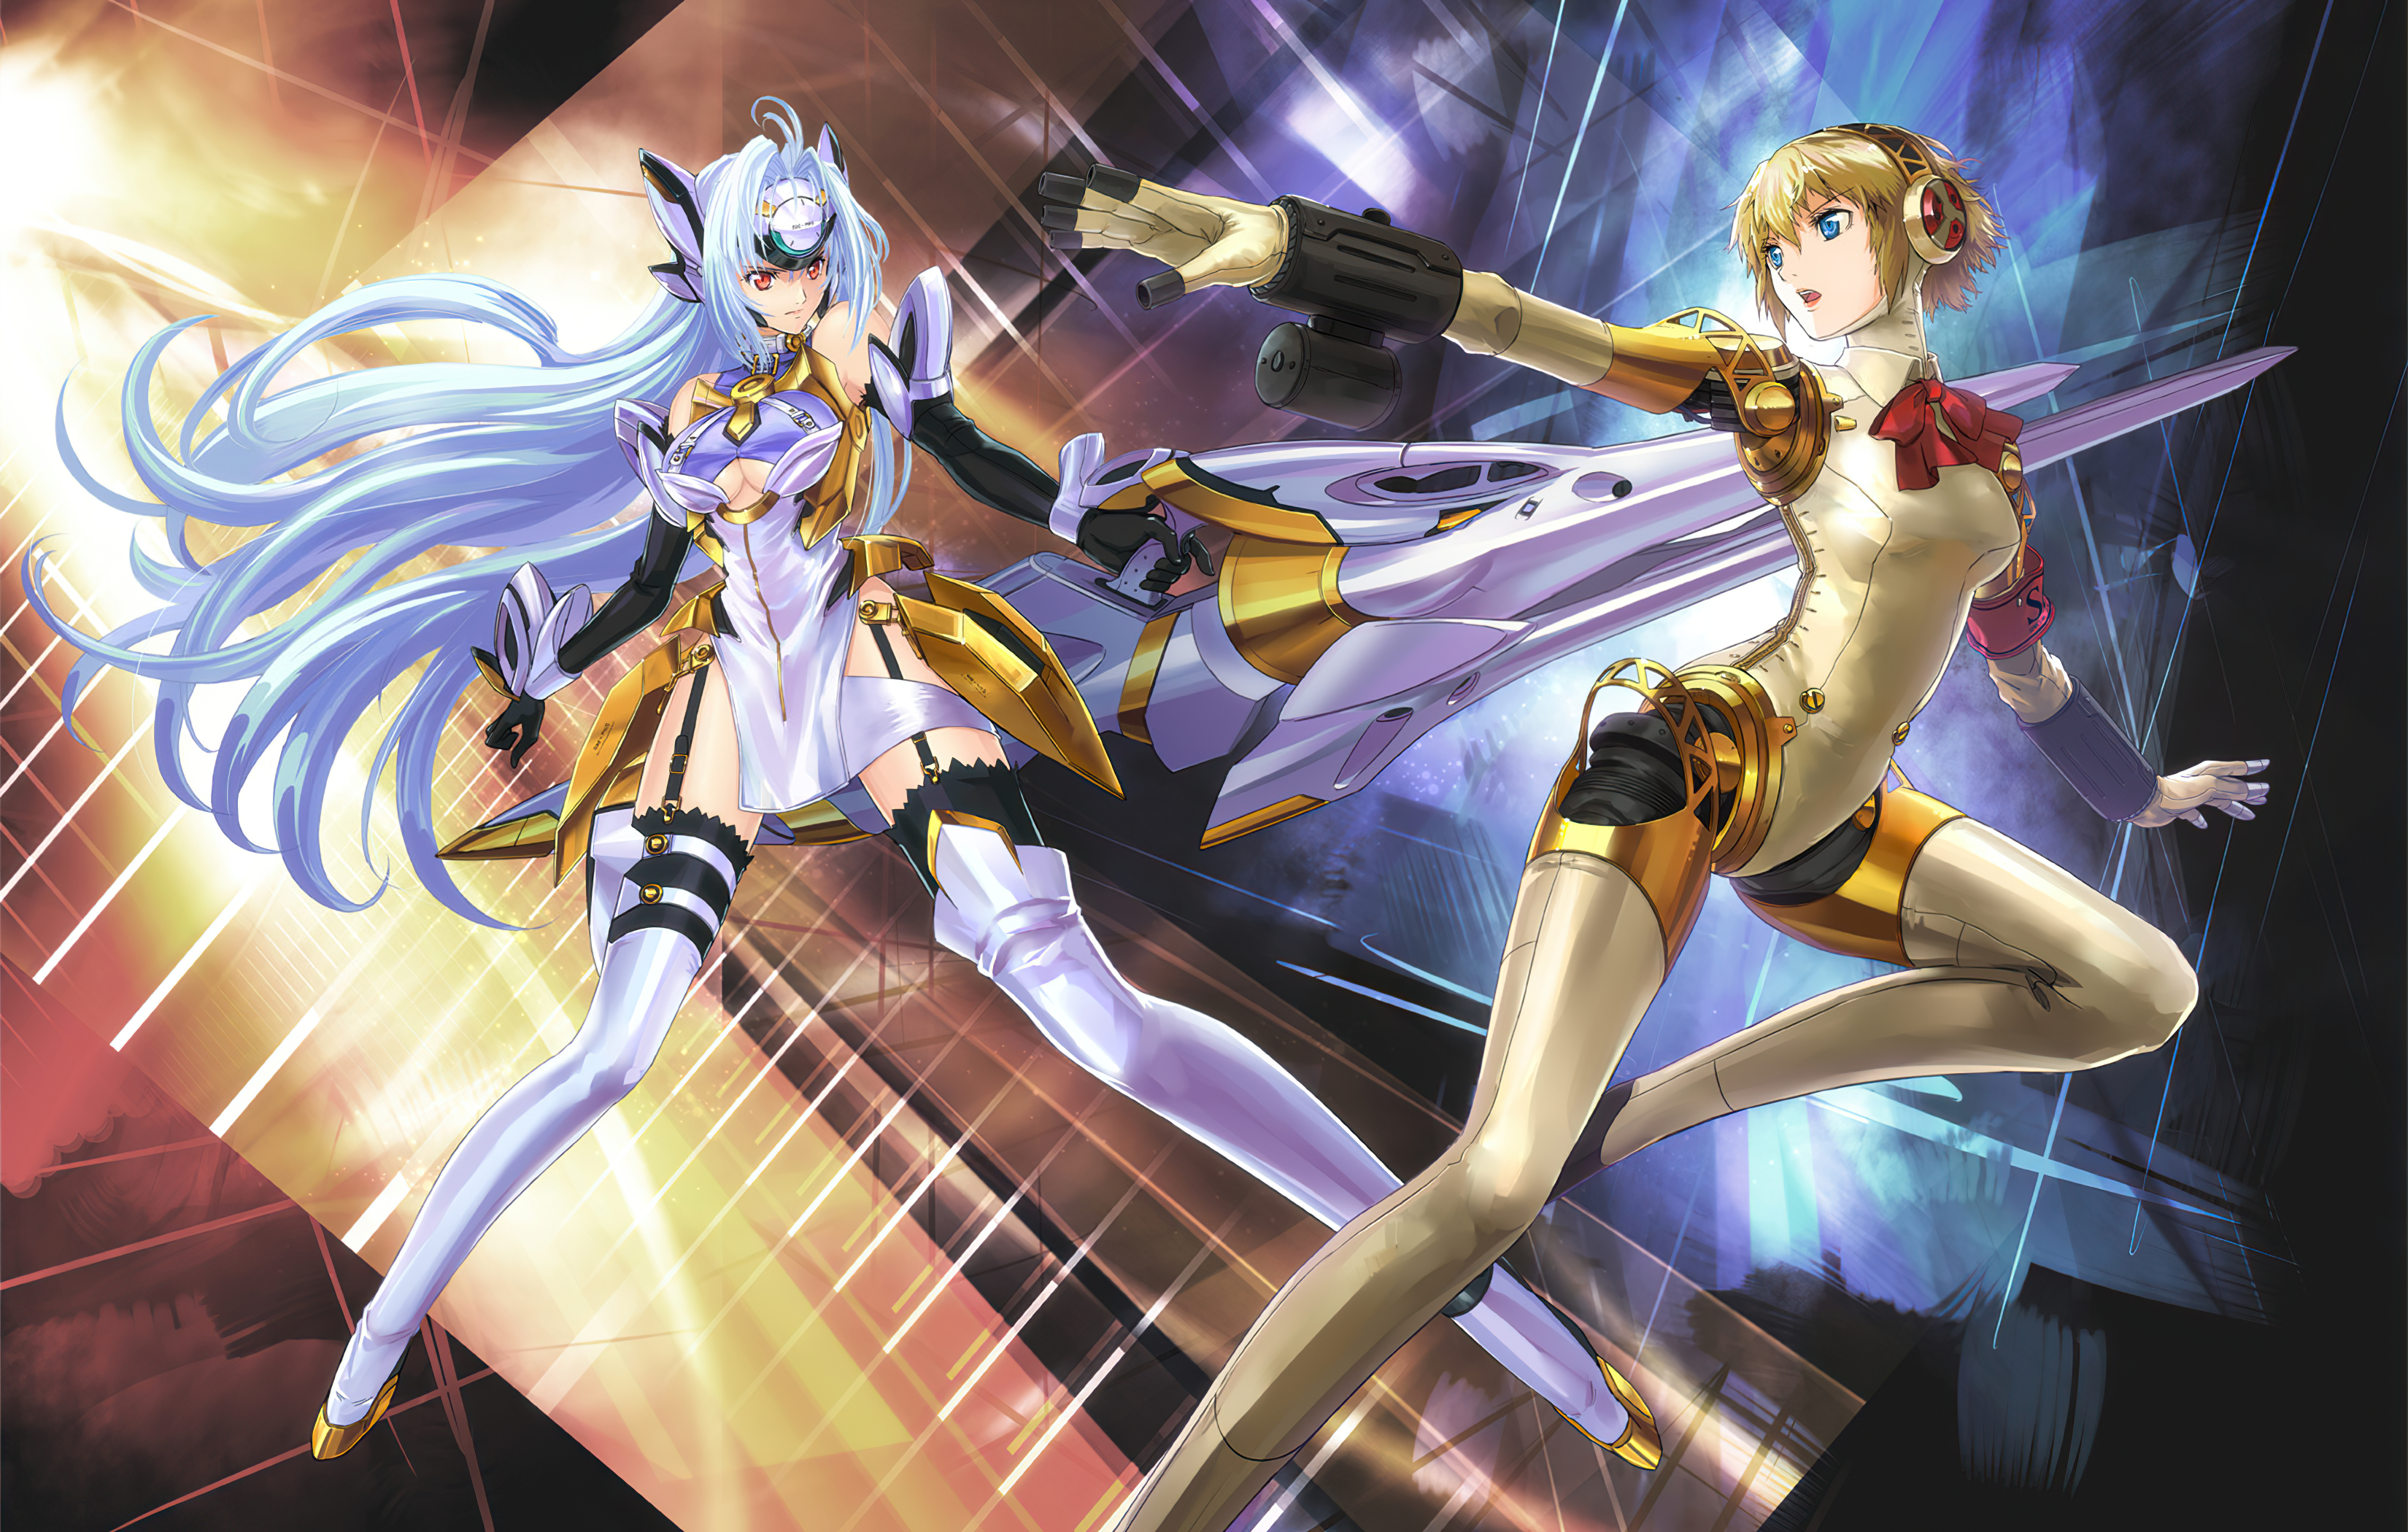 Video game crossover featuring Aigis from Persona and KOS-MOS from Xenosaga.